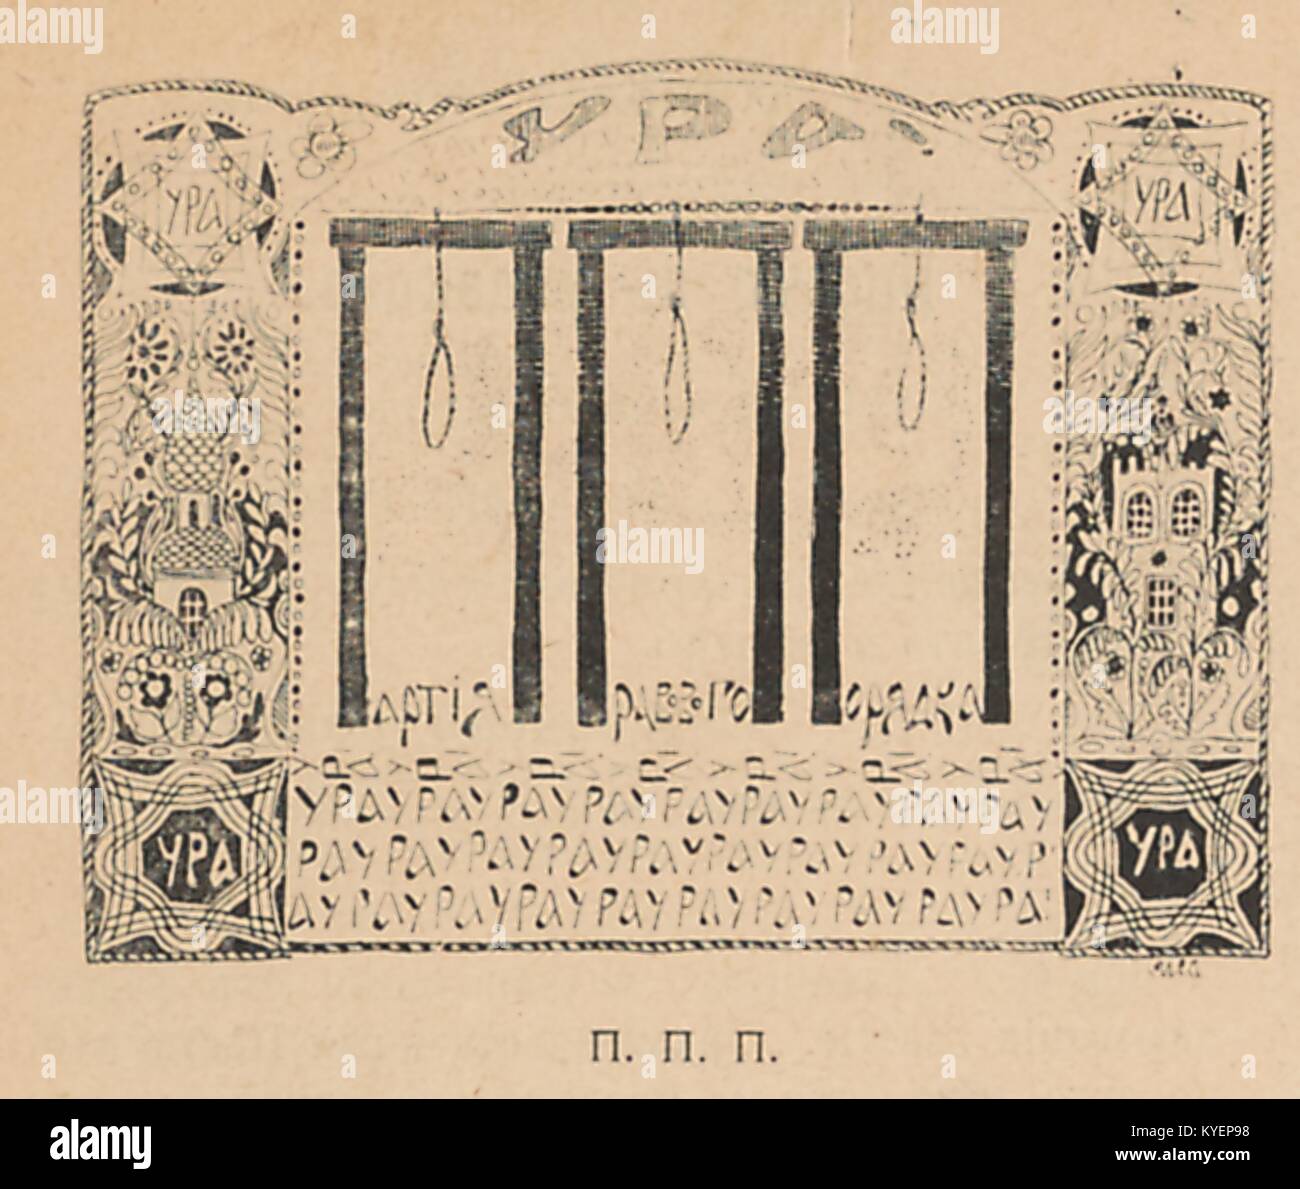 Illustration from the Russian satirical journal Signaly (Signals) depicting three gallows inside of a decorative frame of plants and architecture and the word 'Hooray', which is written in the corners and repeatedly at the bottom of the frame; The frames of the gallows resemble the Russian letter for 'p', and are meant to be followed by the letters written in between the frames, spelling 'Partiya Pravovogo Poryadka', which translates to 'Party of Legal Order', a right-wing political party from the early 1900s that supported the monarchy; The text below the picture reads 'P P P', referencing th Stock Photo